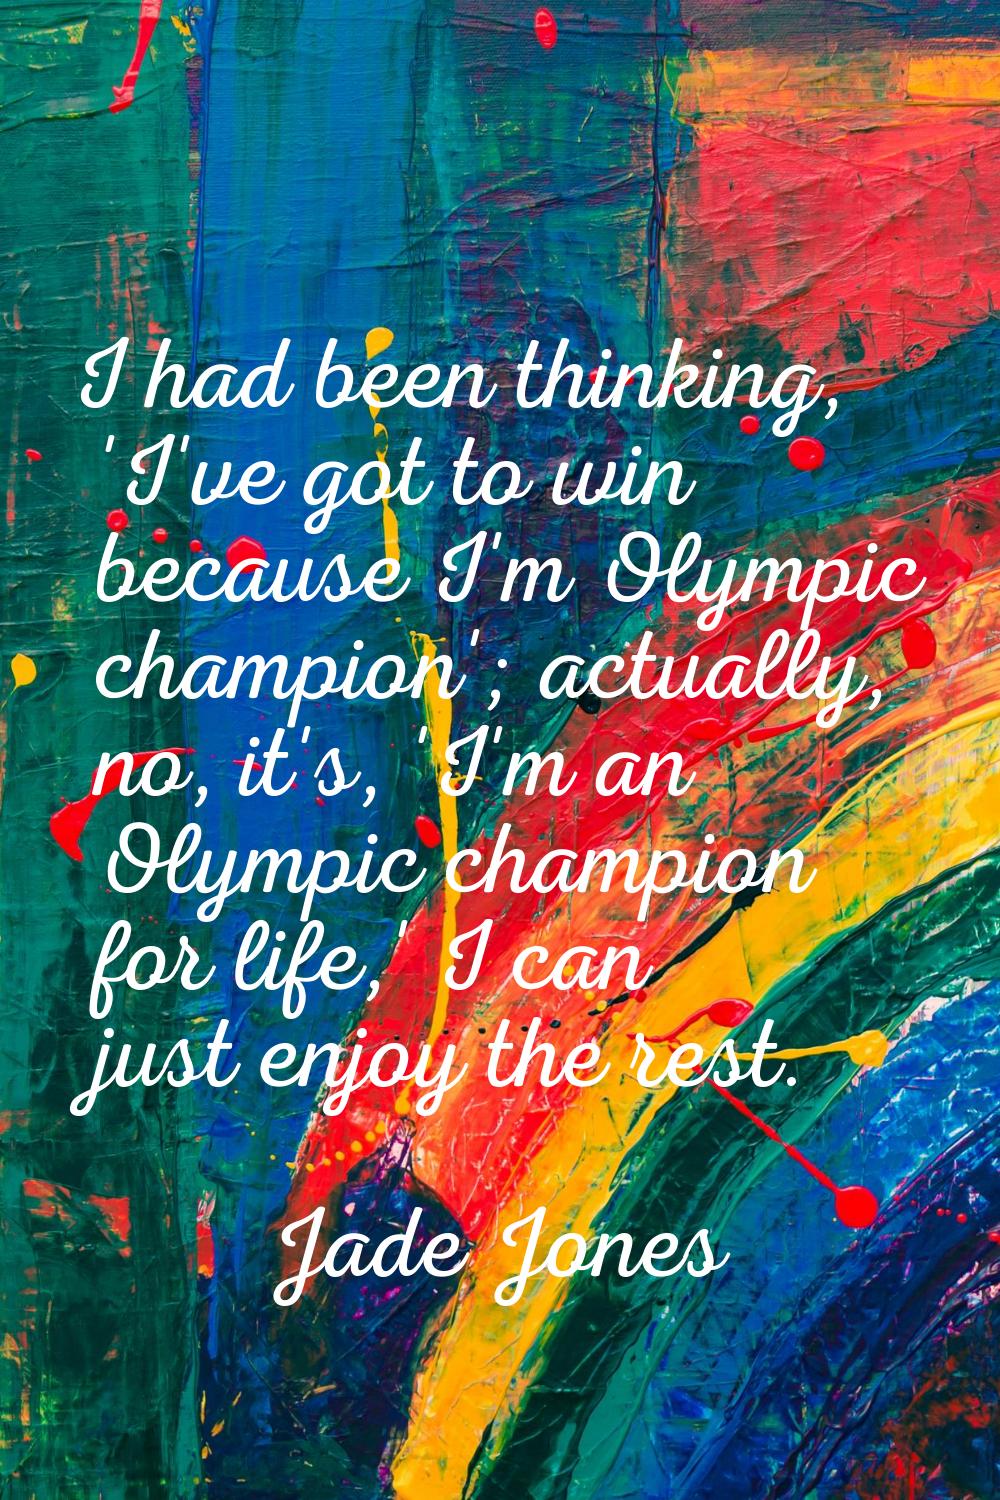 I had been thinking, 'I've got to win because I'm Olympic champion'; actually, no, it's, 'I'm an Ol